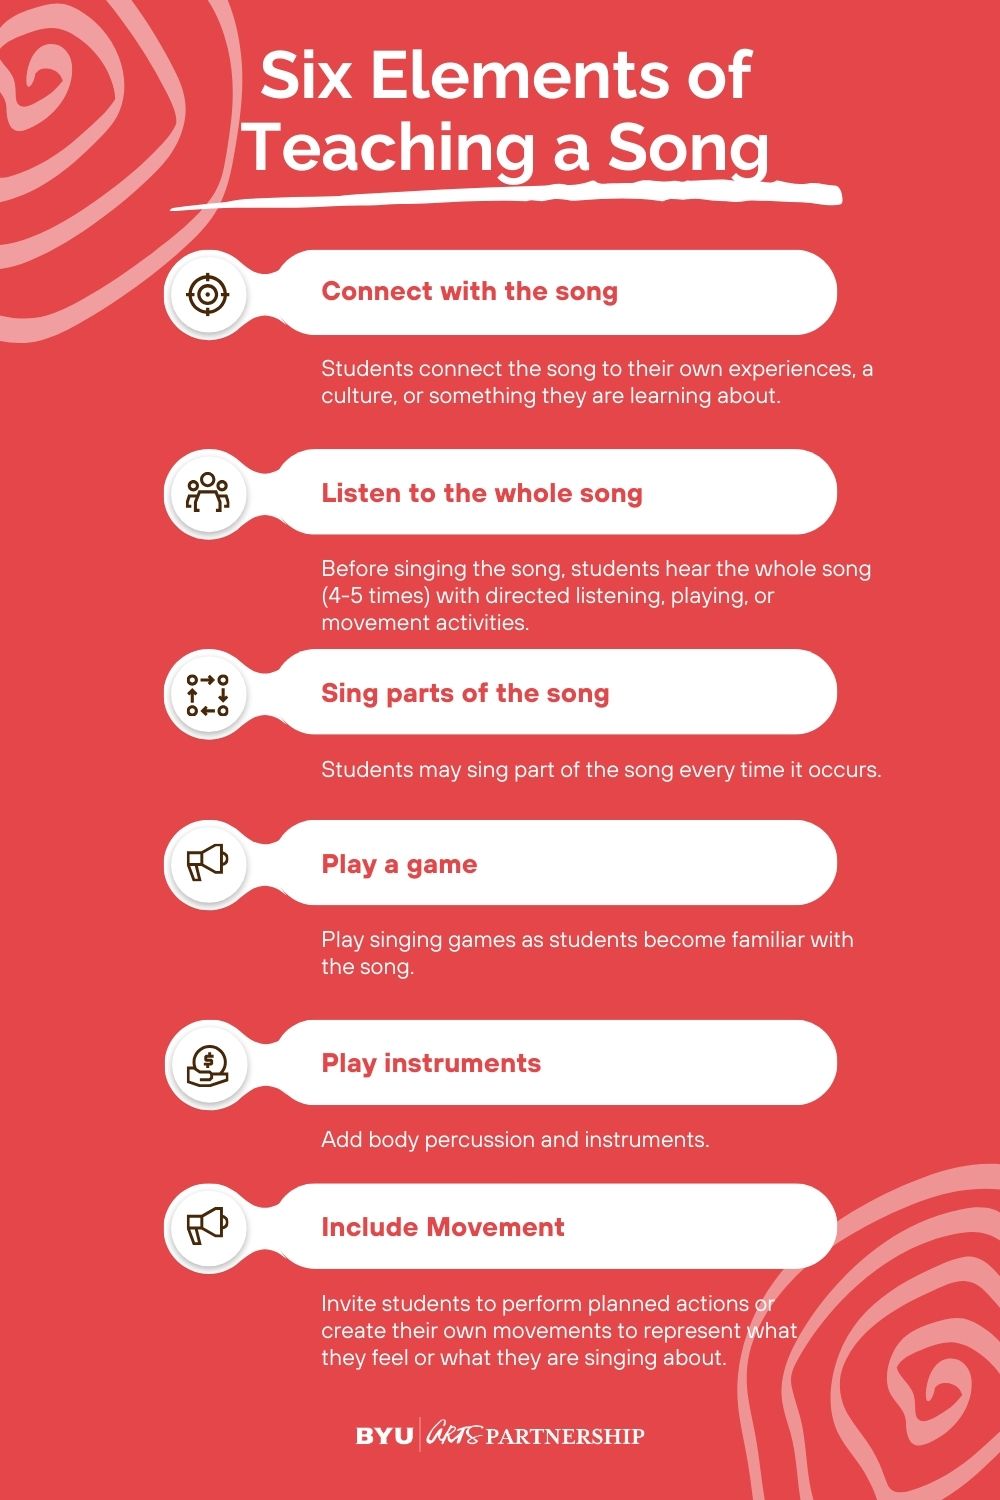 6 elements of teaching a song infographic